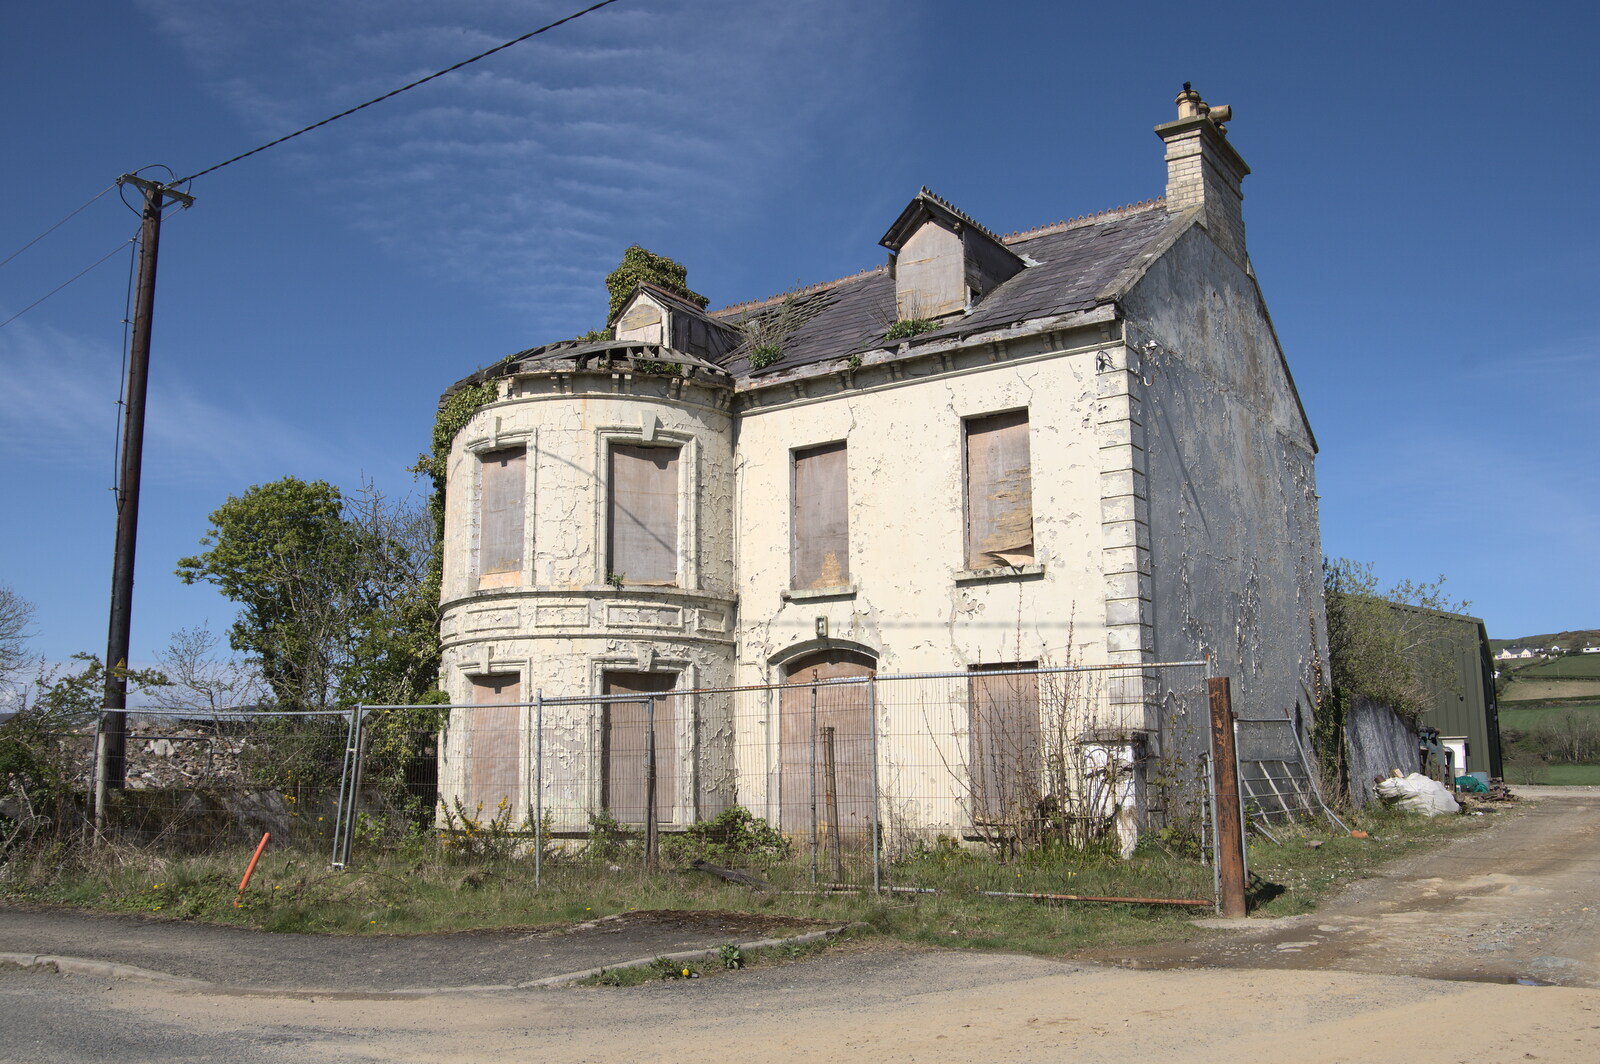 Greencastle, Doagh and Malin Head, County Donegal, Ireland - 19th April 2022: A derelict house on the way back to Greencastle